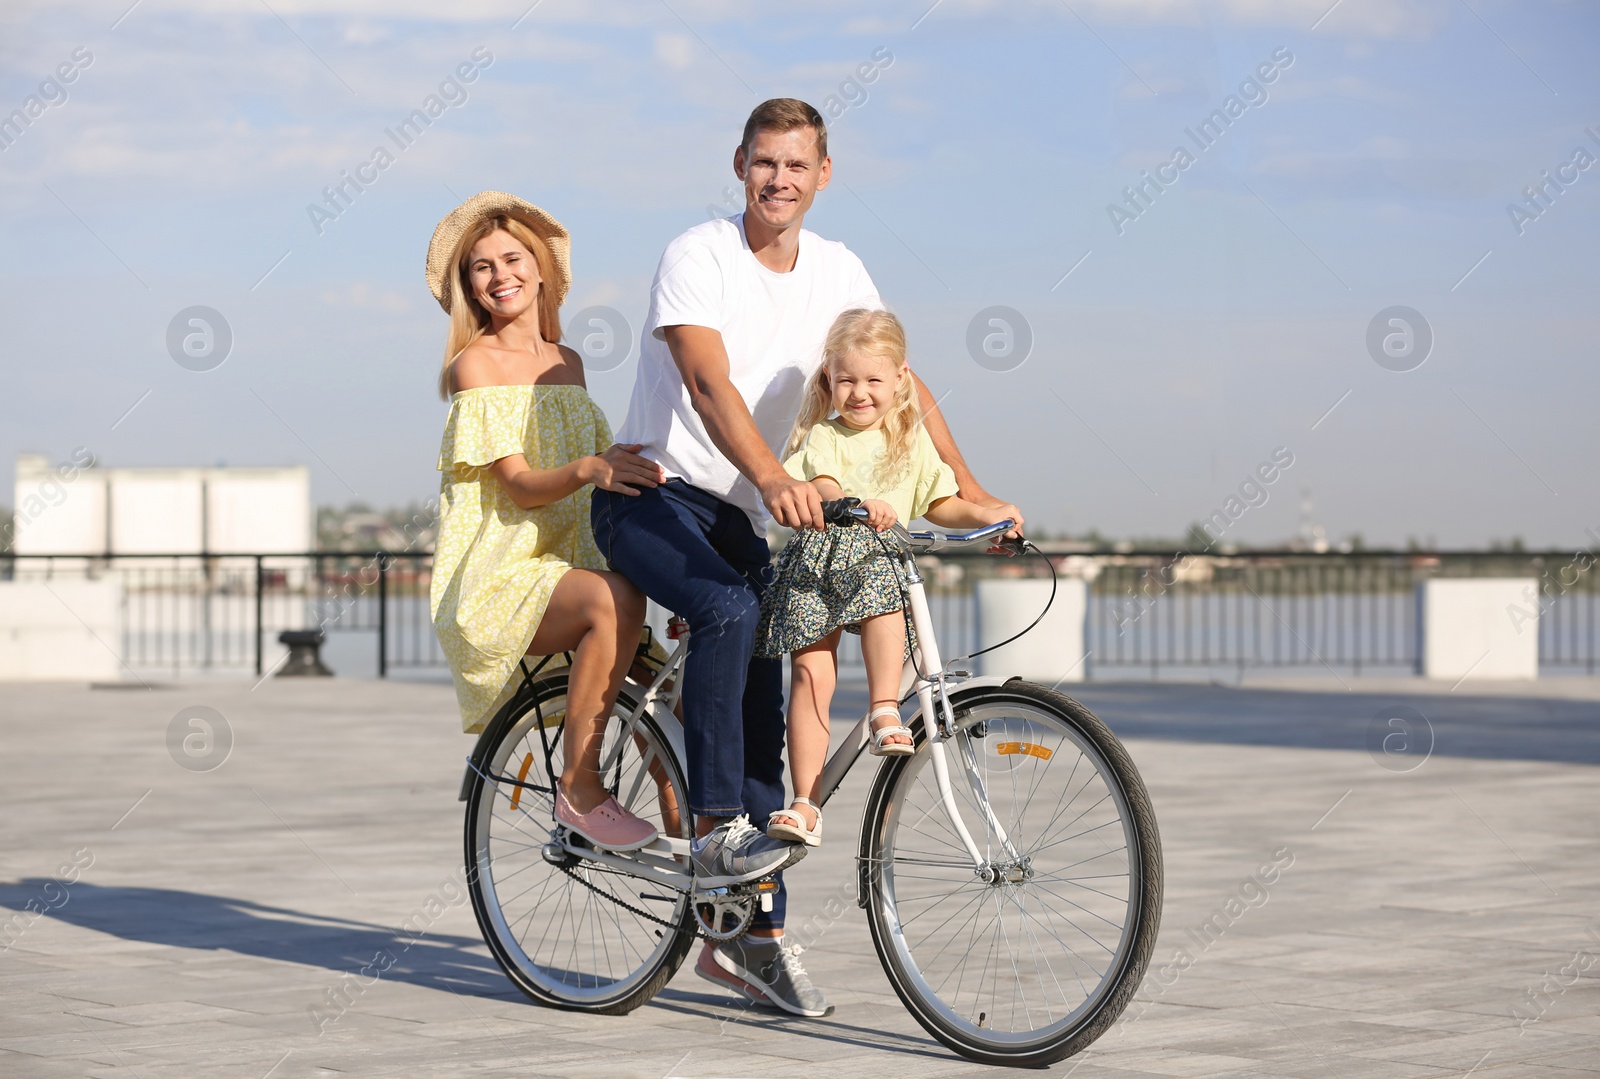 Photo of Happy family riding bicycle outdoors on sunny day